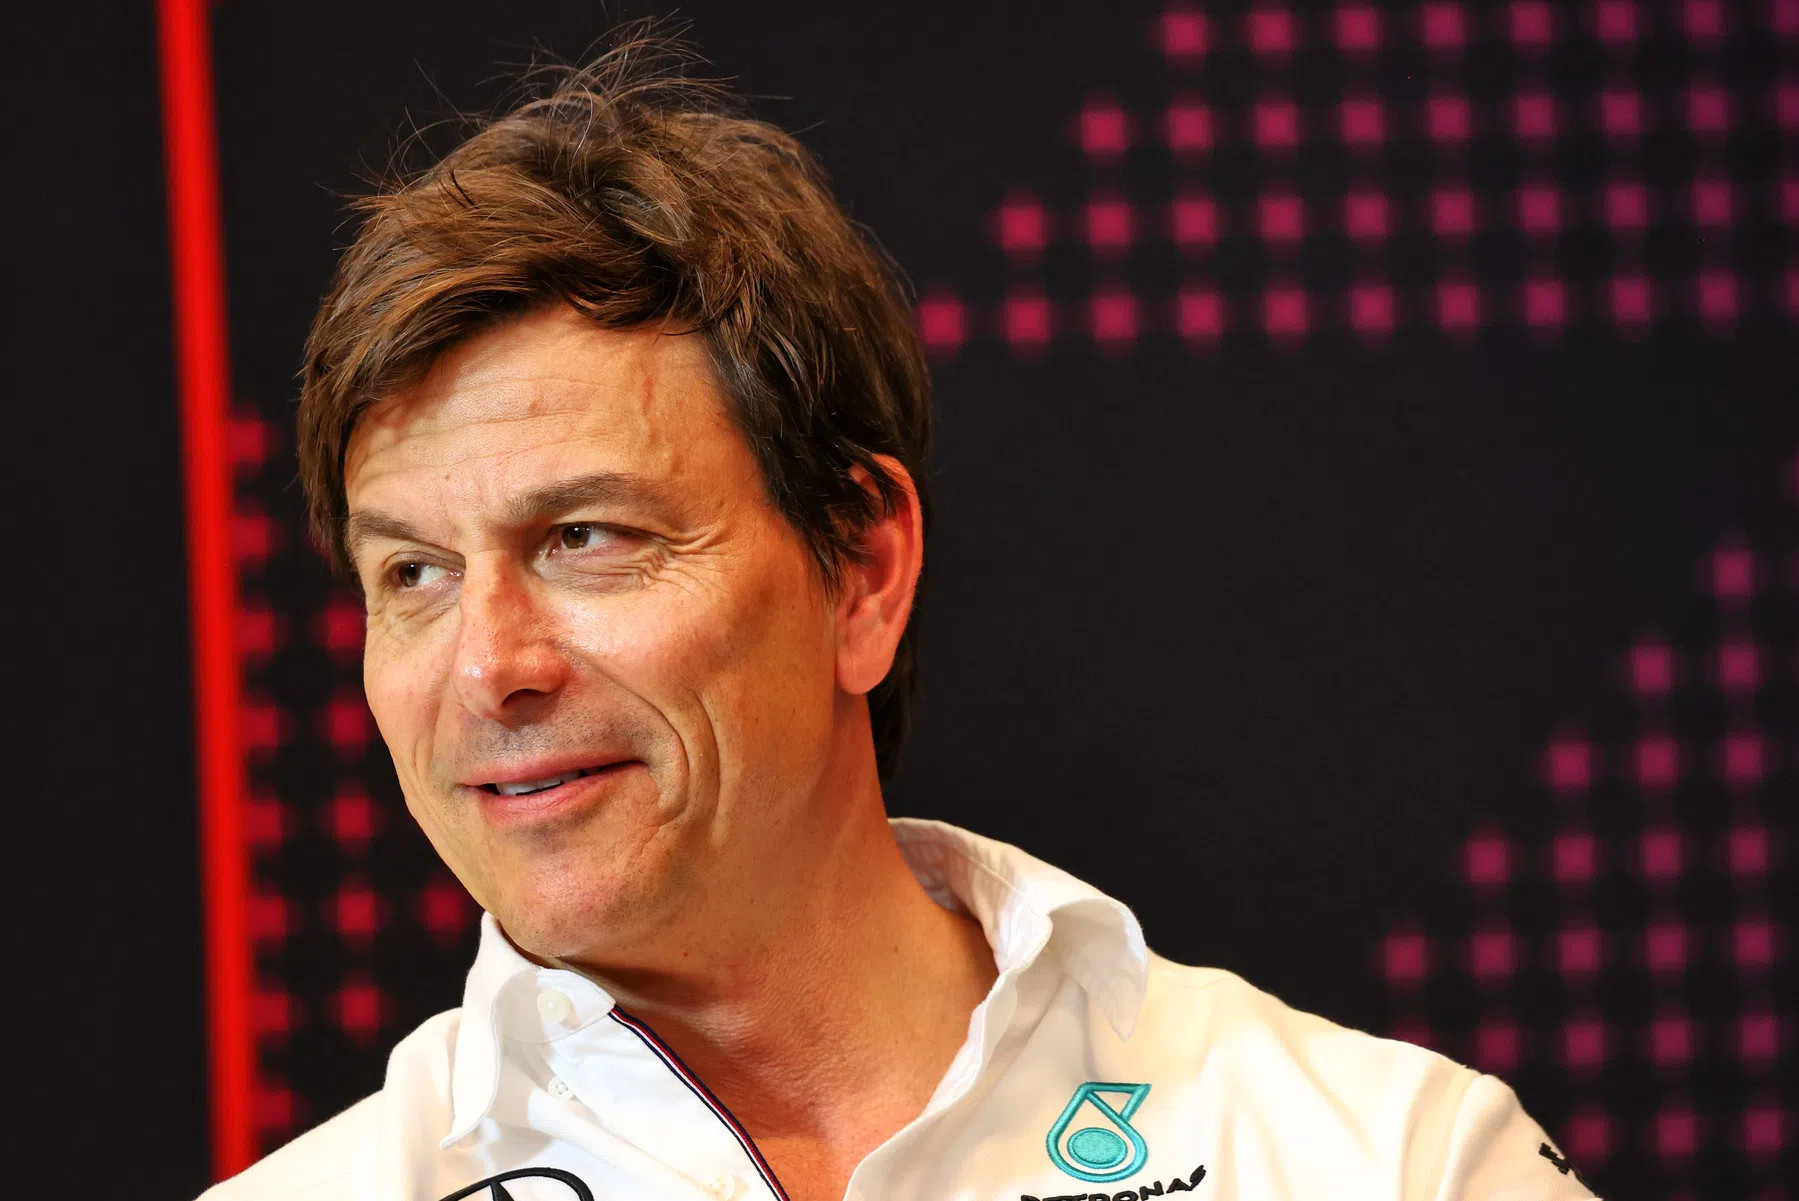 Wolff jokes with Vasseur and fears FIA investigation